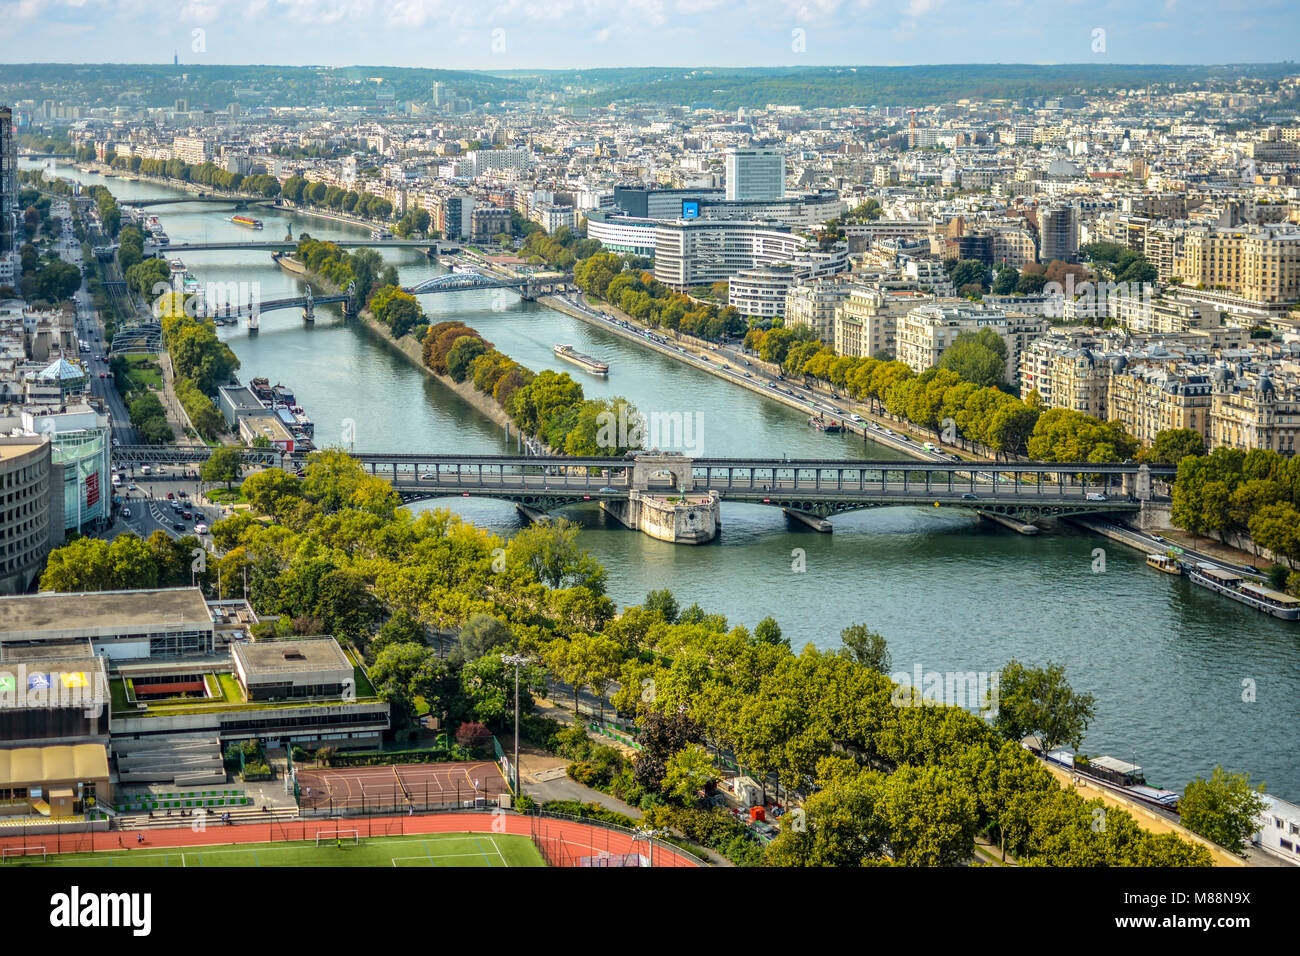 Île aux Cygnes a small island on the river Seine in Paris, France, in the 15th arrondissement and Pont de Grenelle Bridge taken from the Eiffel Tower Stock Photo